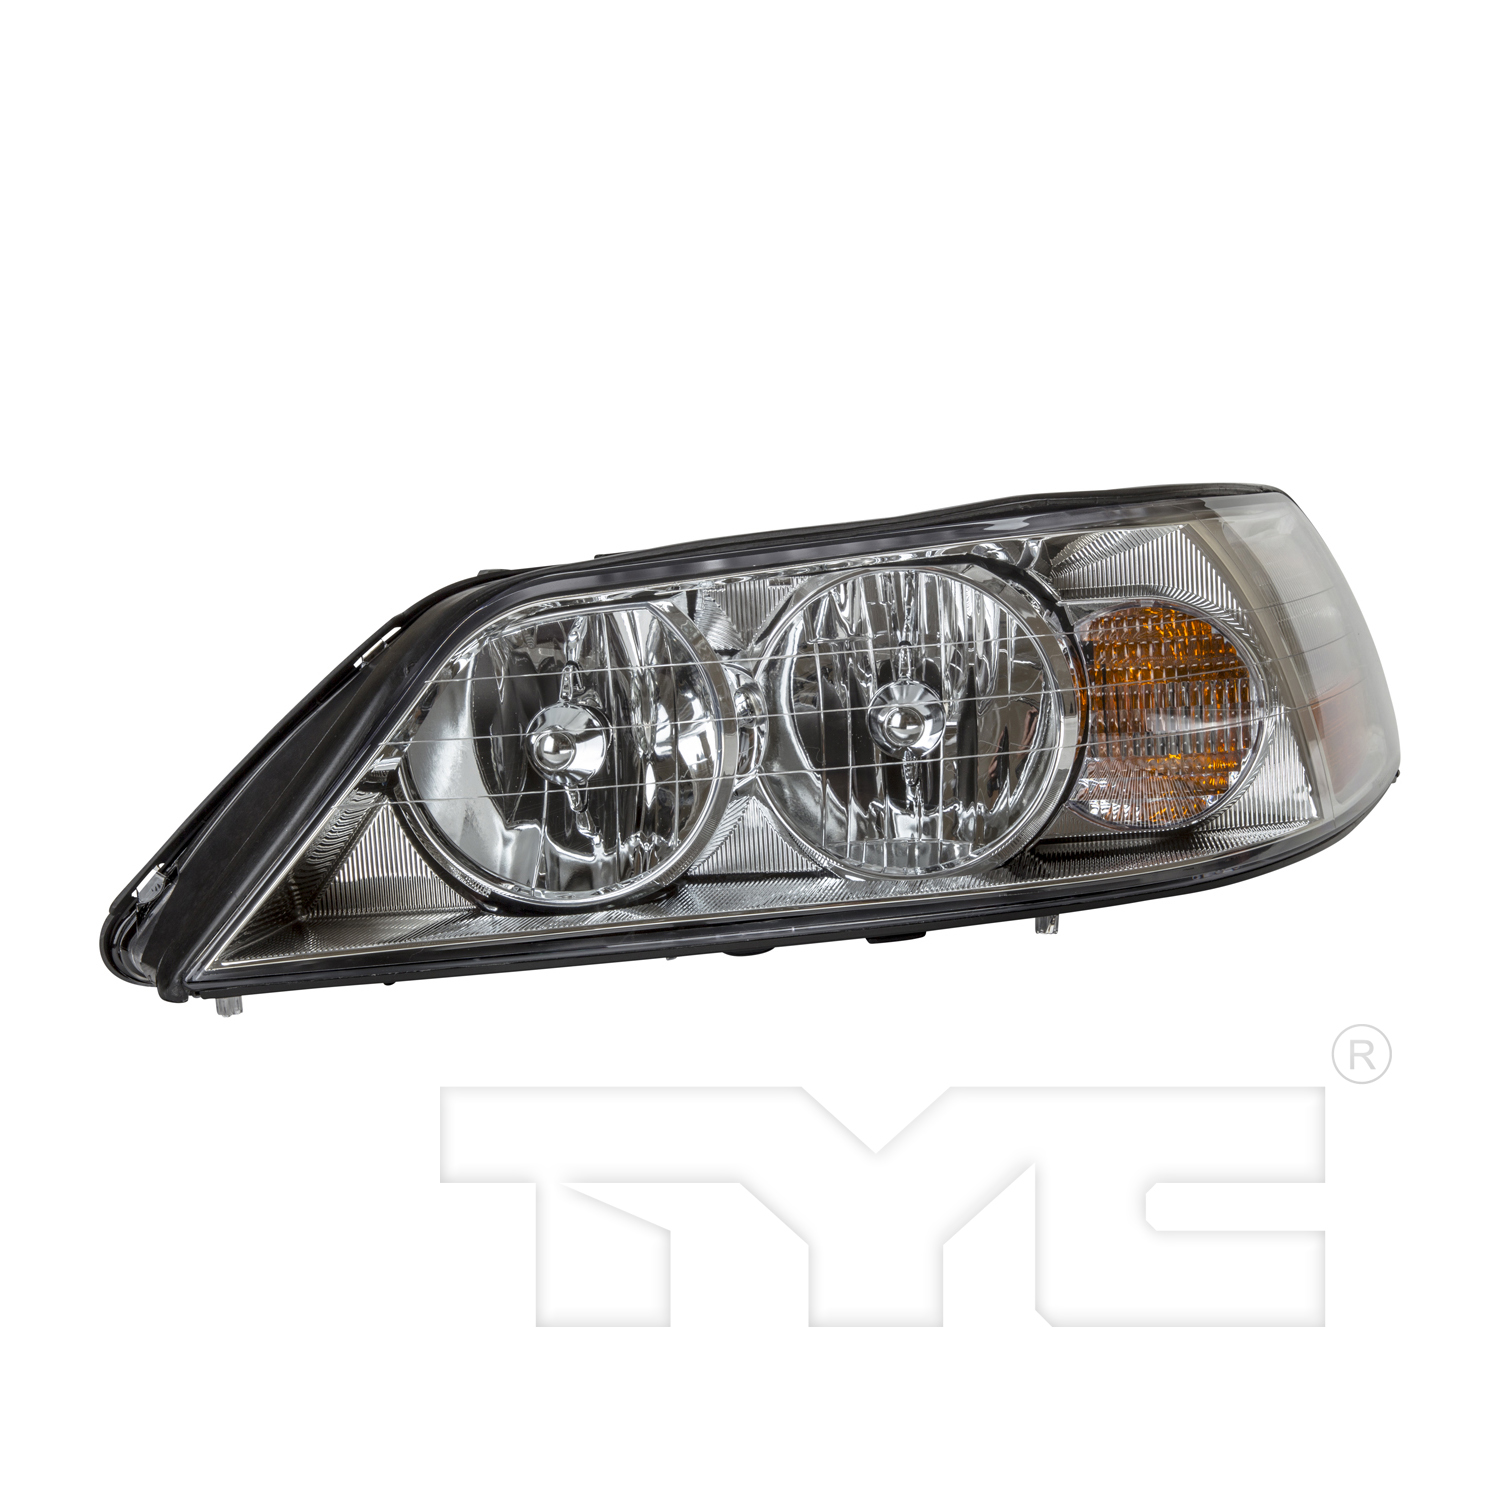 Aftermarket HEADLIGHTS for LINCOLN - TOWN CAR, TOWN CAR,05-11,LT Headlamp assy composite